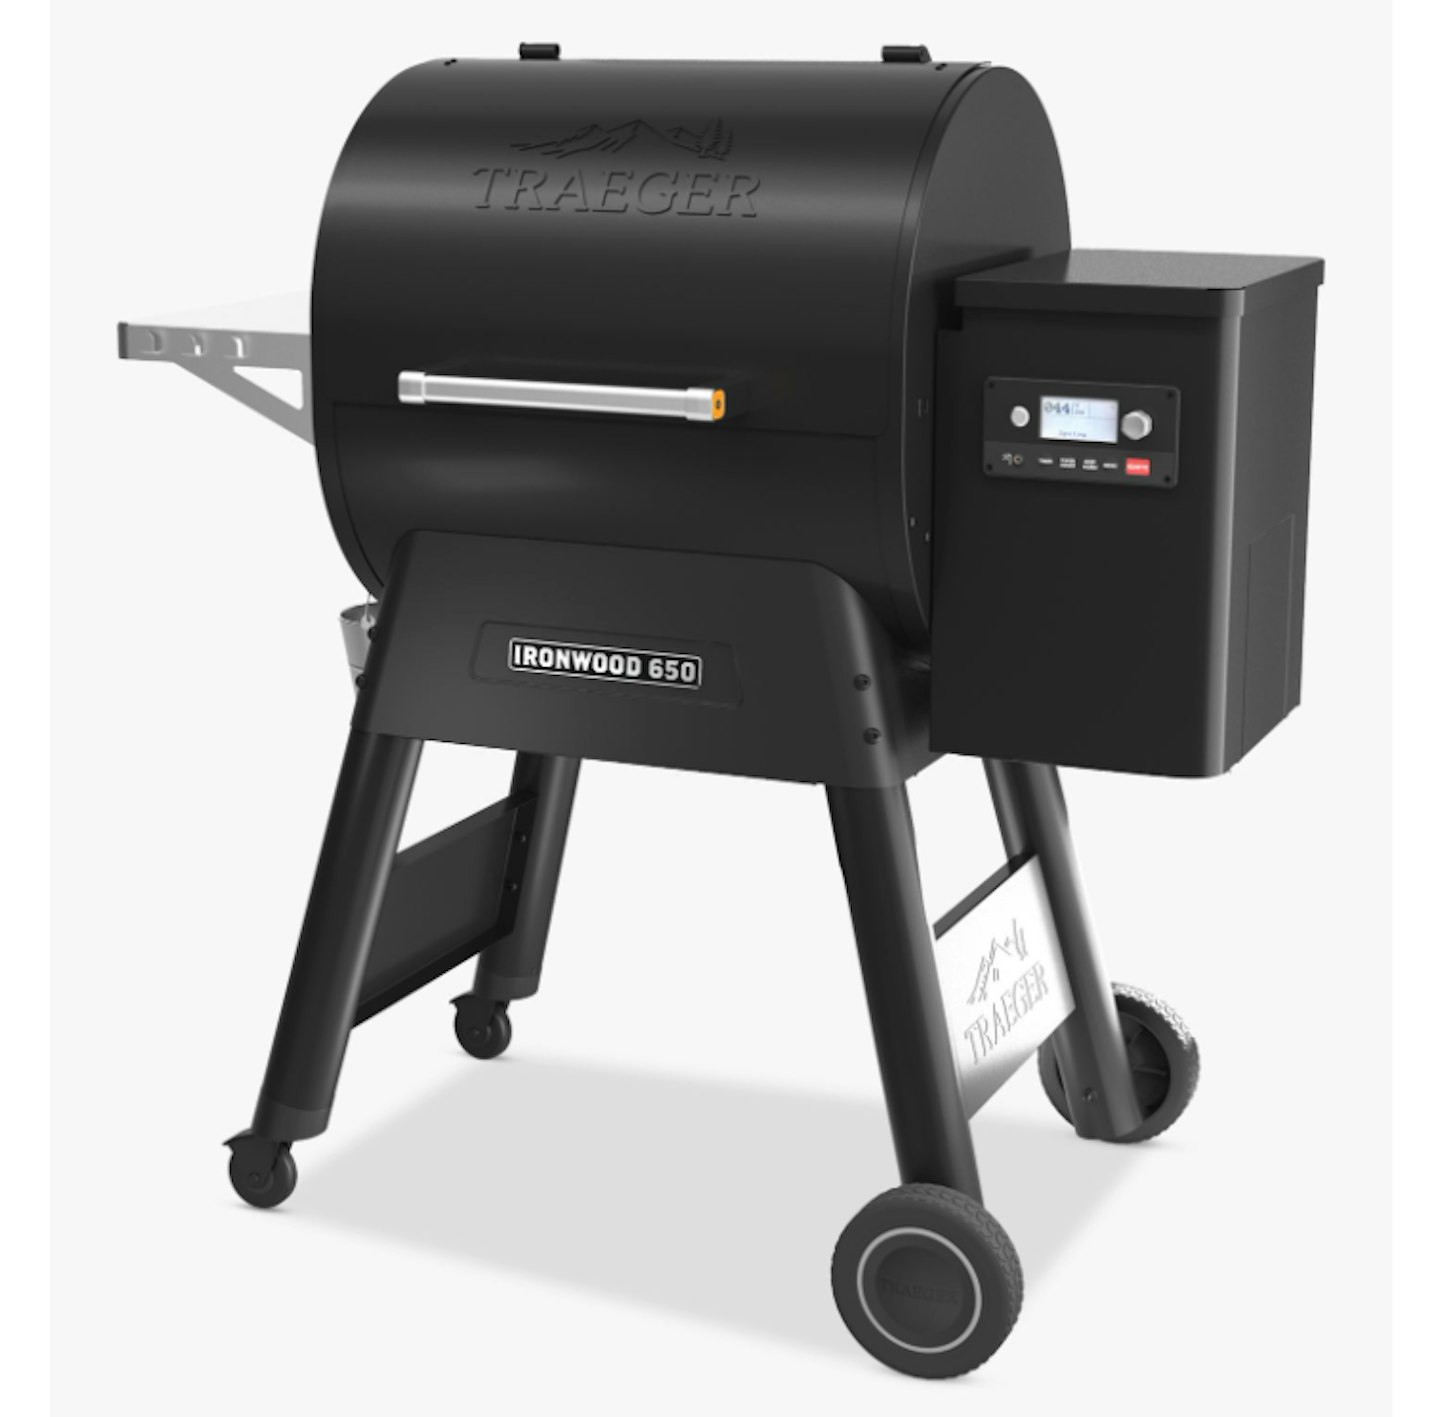 Traeger Ironwood D2 650 WiFi Connected Wood Pellet BBQ